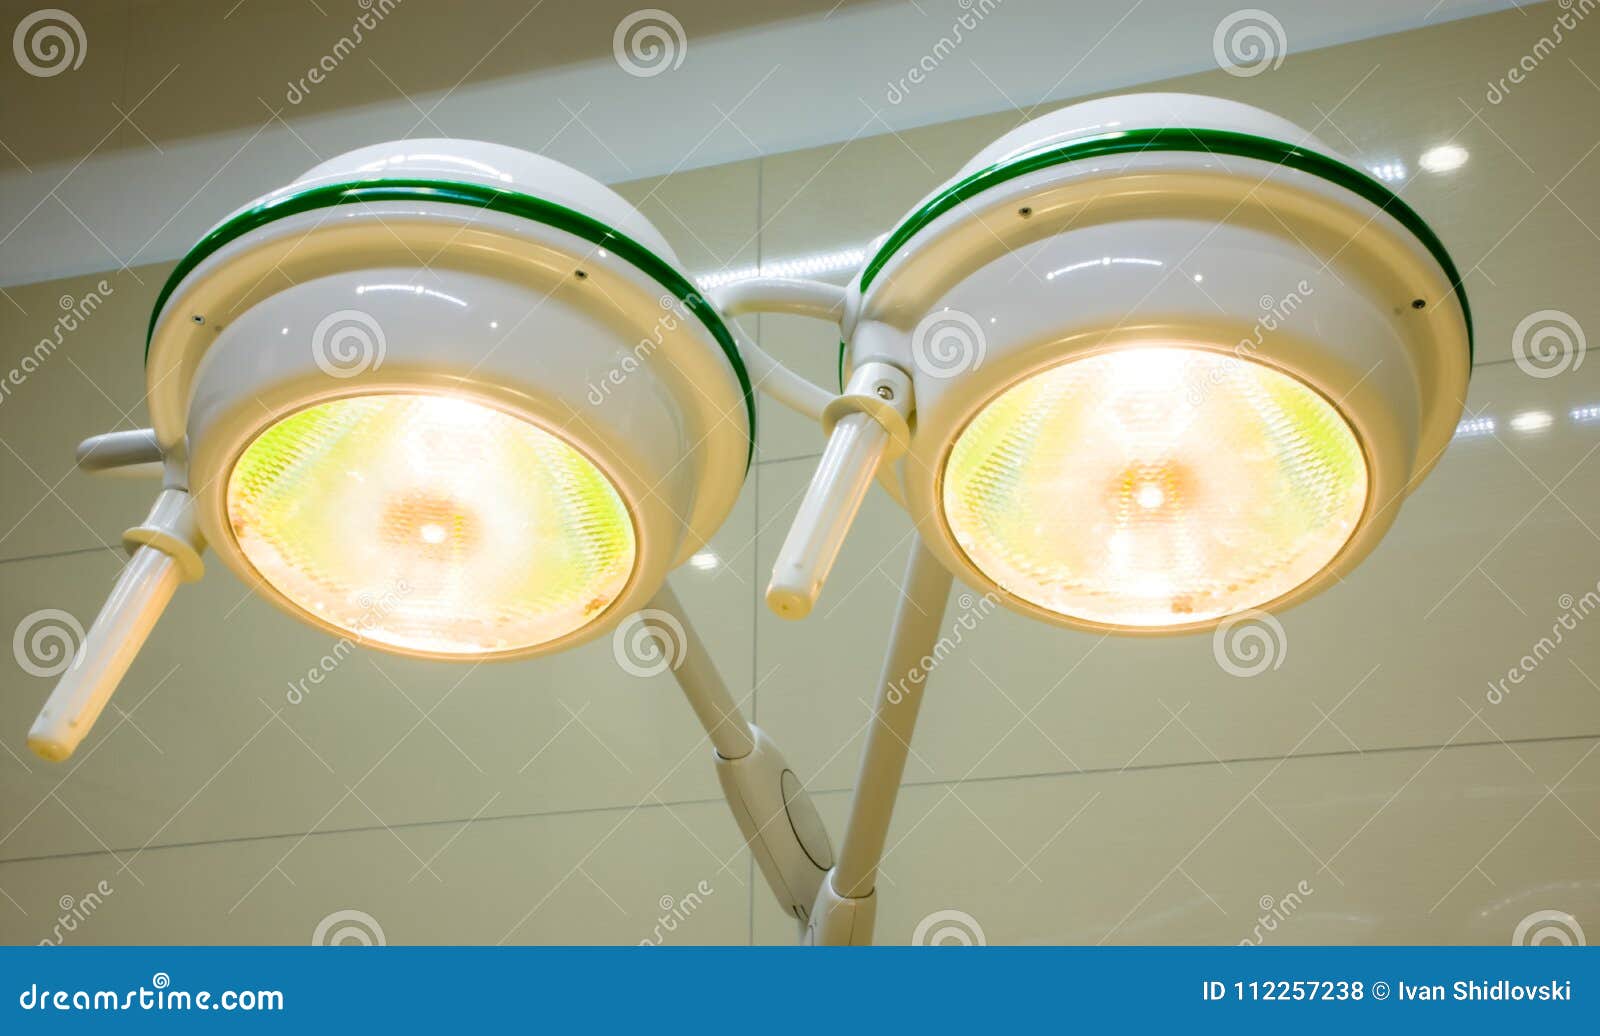 working shadowless surgical lamp in operating room during surgery medical operation nobody close-up